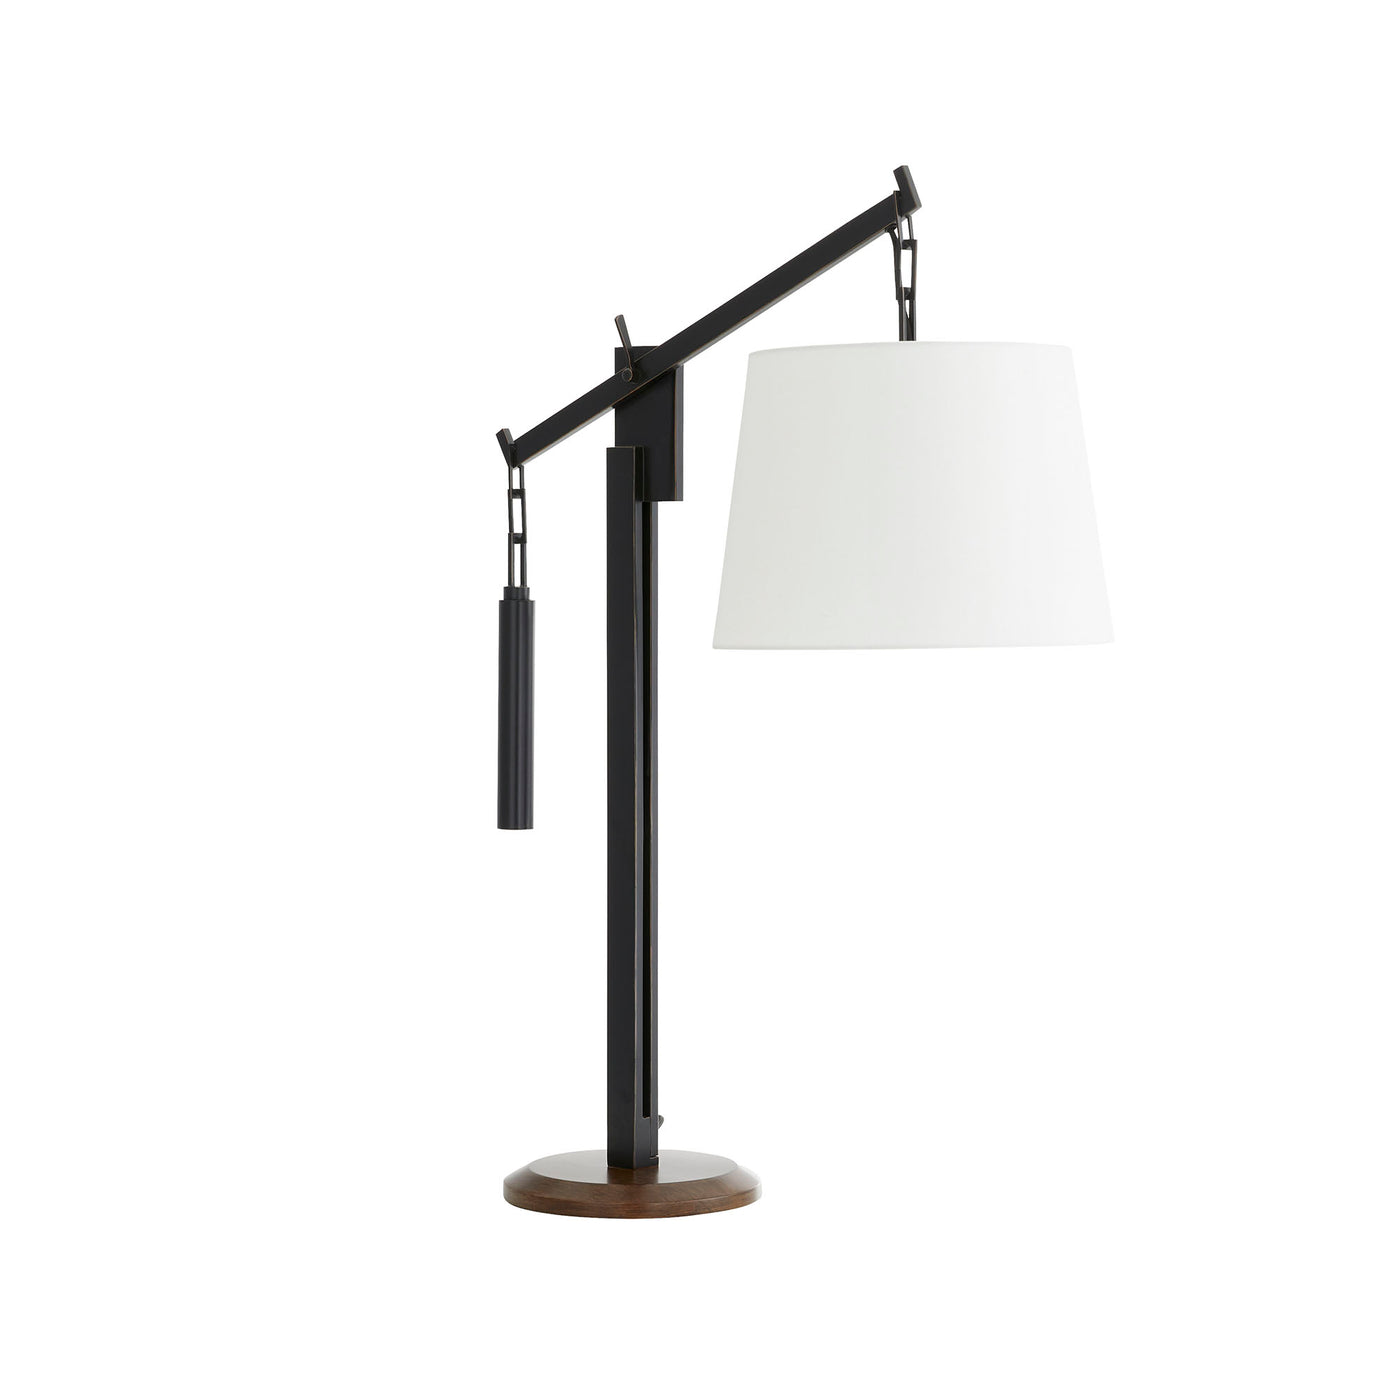 TABLE LAMP AGED BRONZE/BROWN WOOD